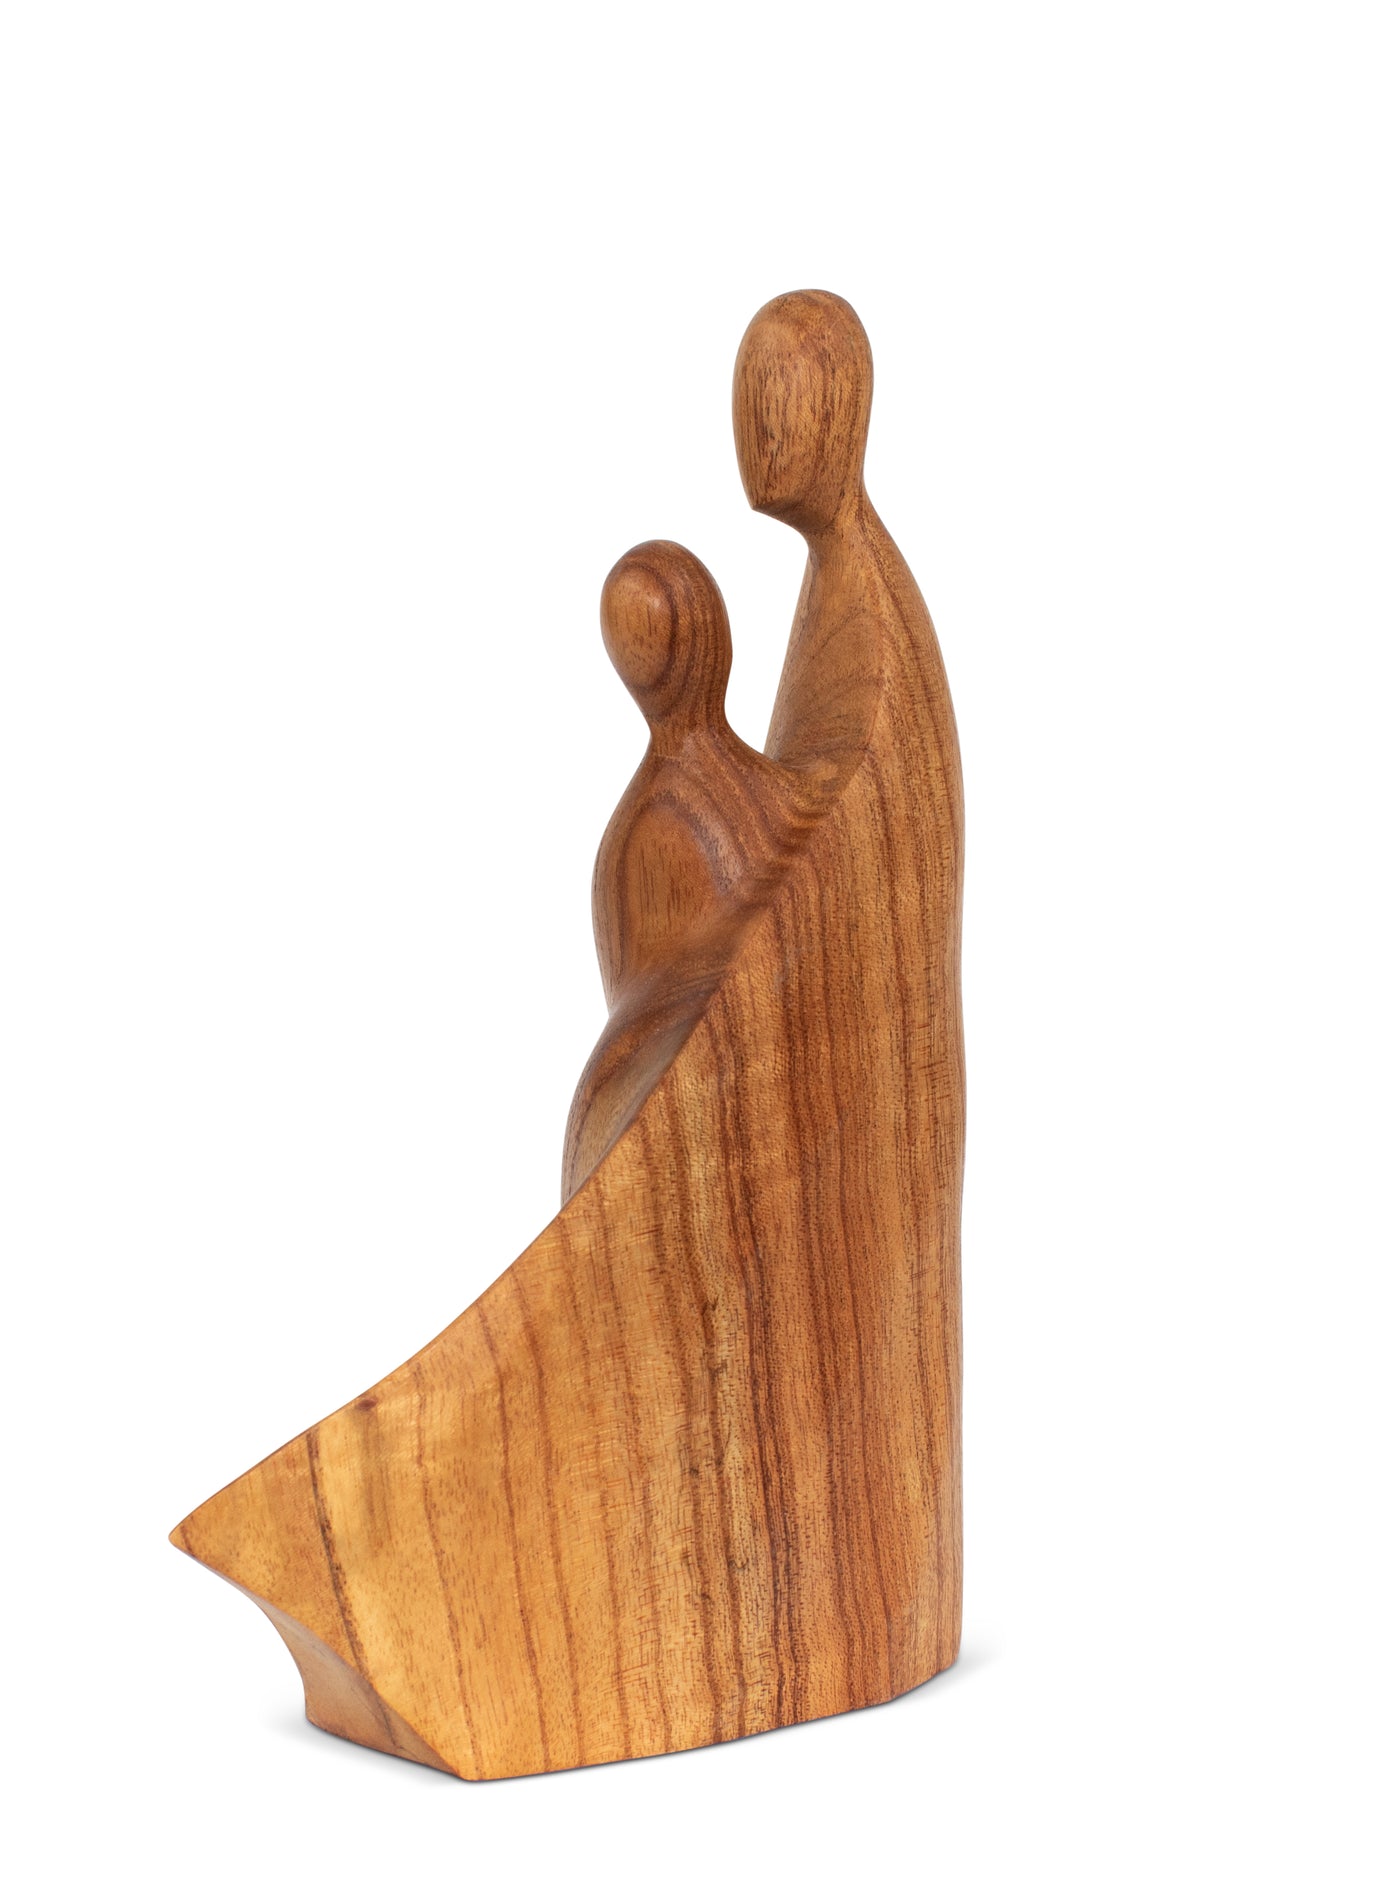 Wooden Handmade Abstract Mother and Child Loving Figurine Sculpture Statue Handcrafted Gift Decorative Home Decor Accent Decoration Artwork Hand Carved